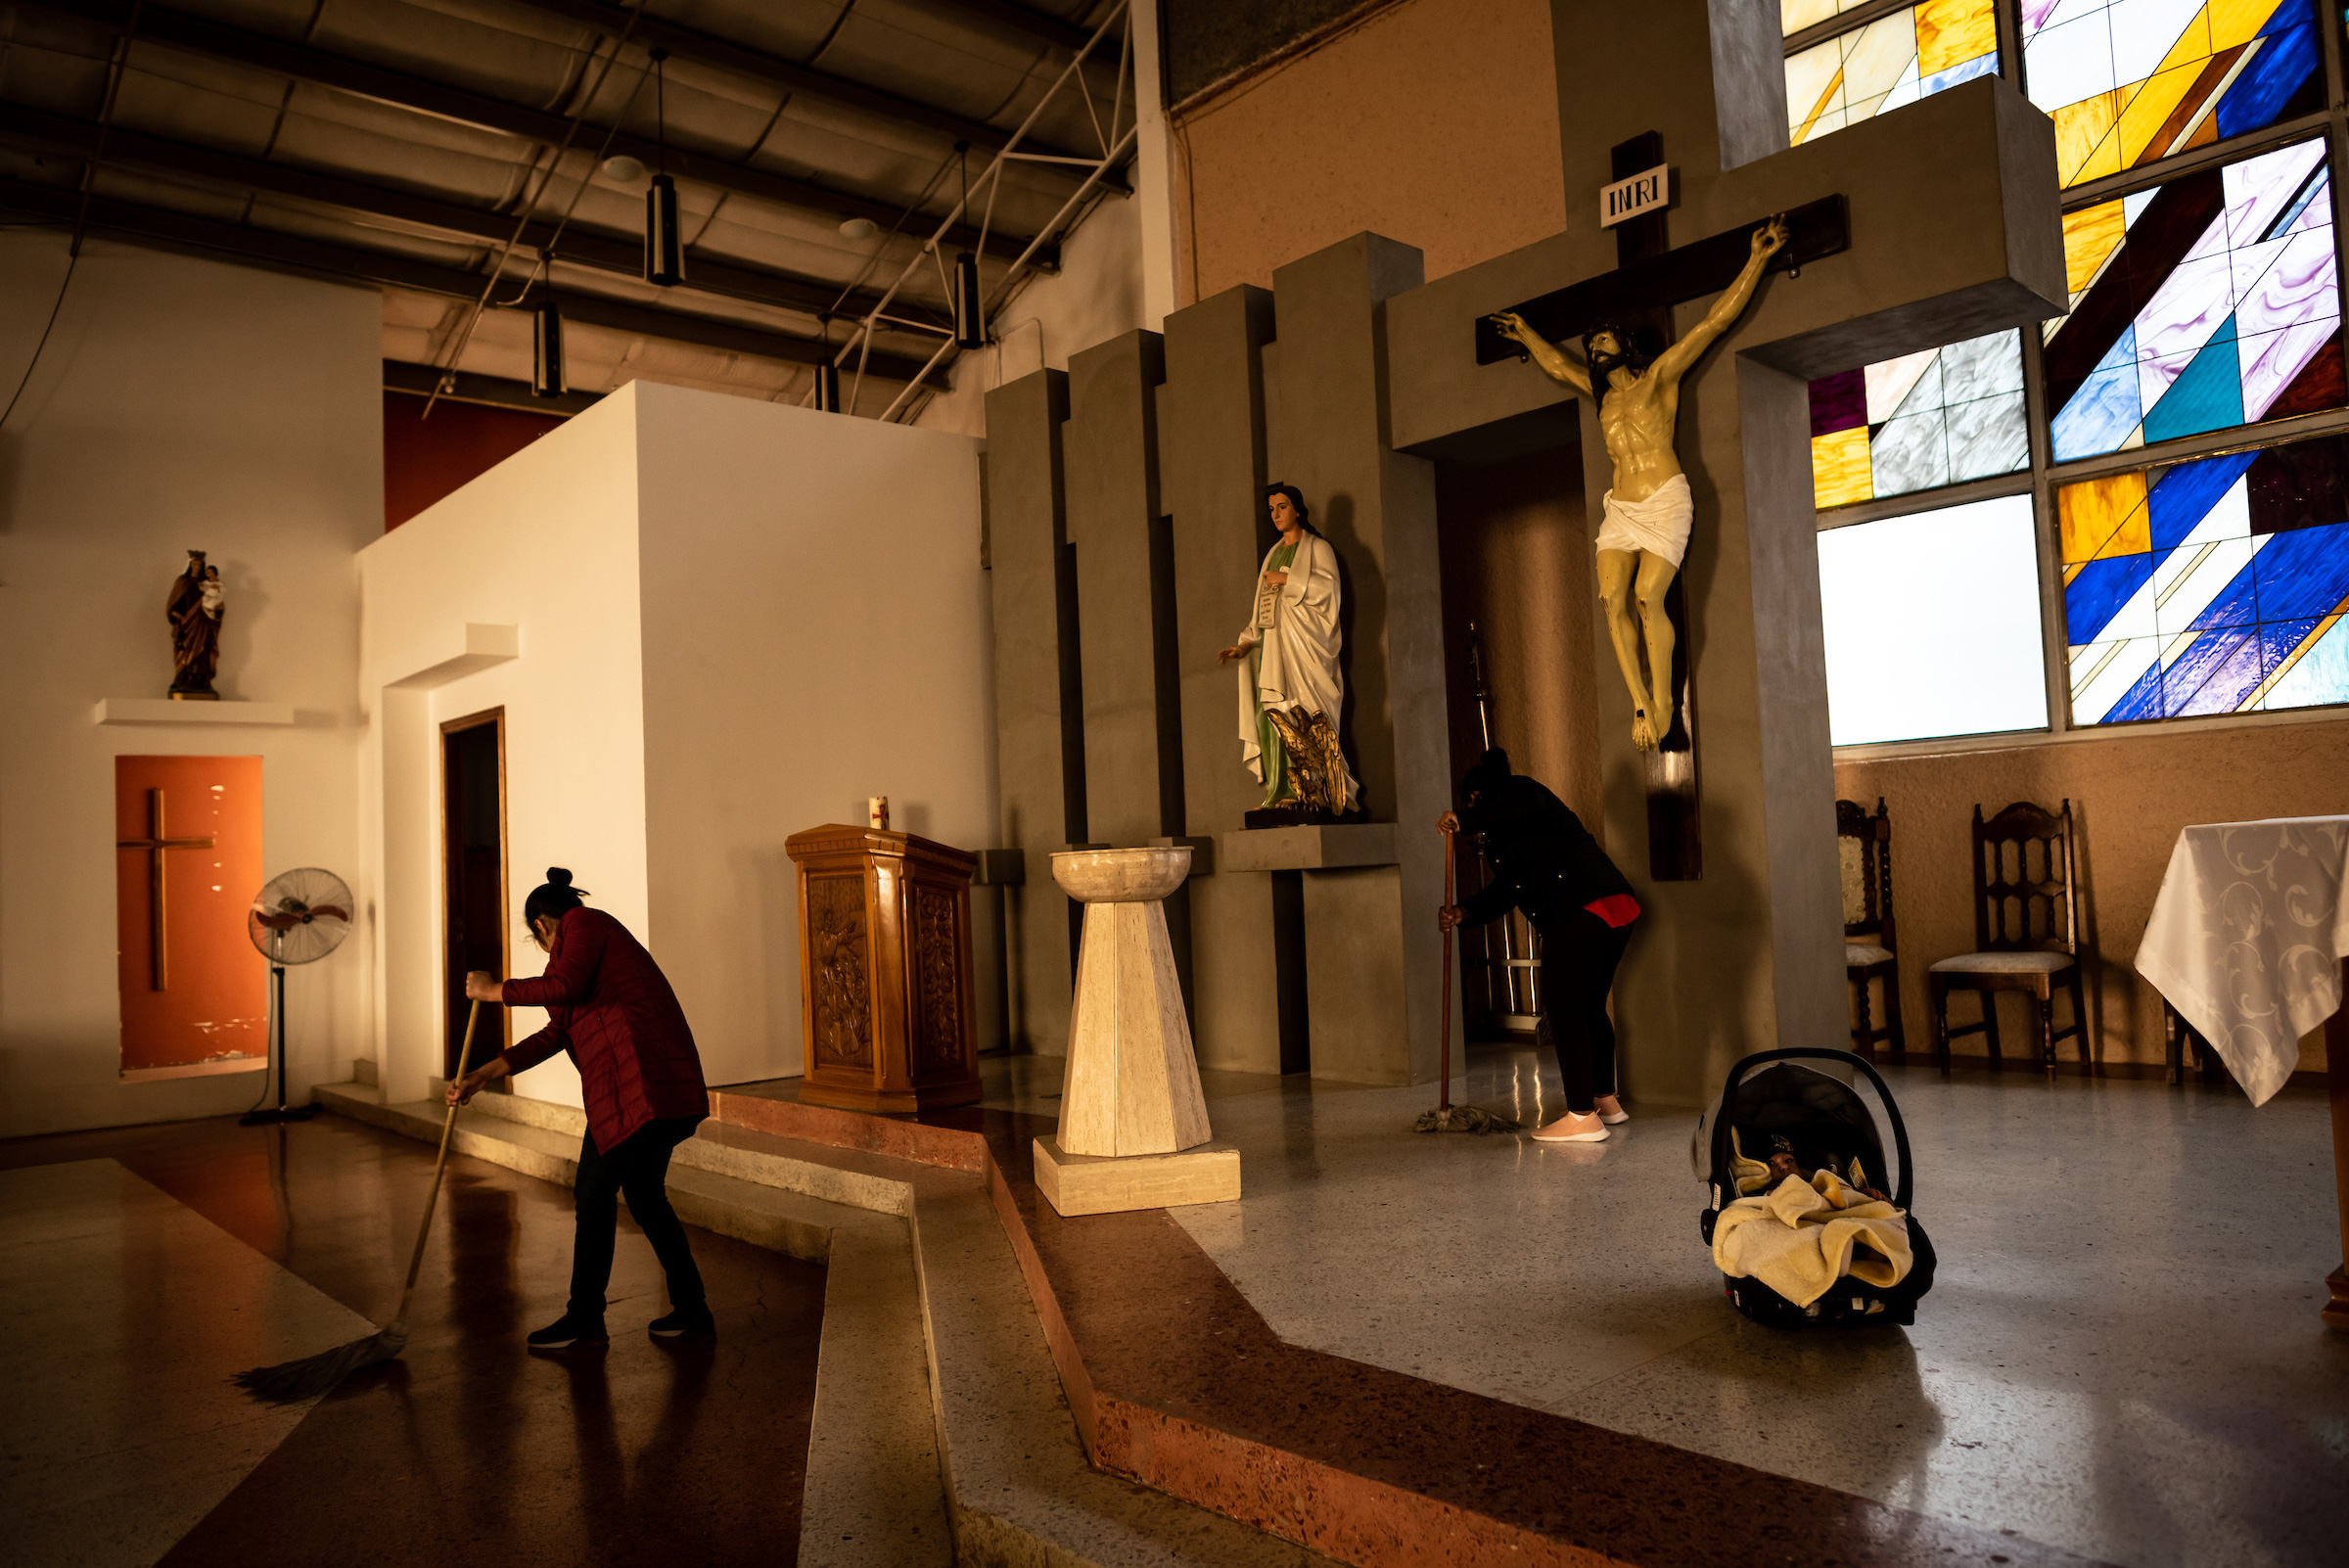 Migrant women mop the sanctuary floors of the San Juan Apóstol Evangelical Parish. The Parish built living quarters on the side of their church to shelter migrant women who are pregnant or who recently gave birth.